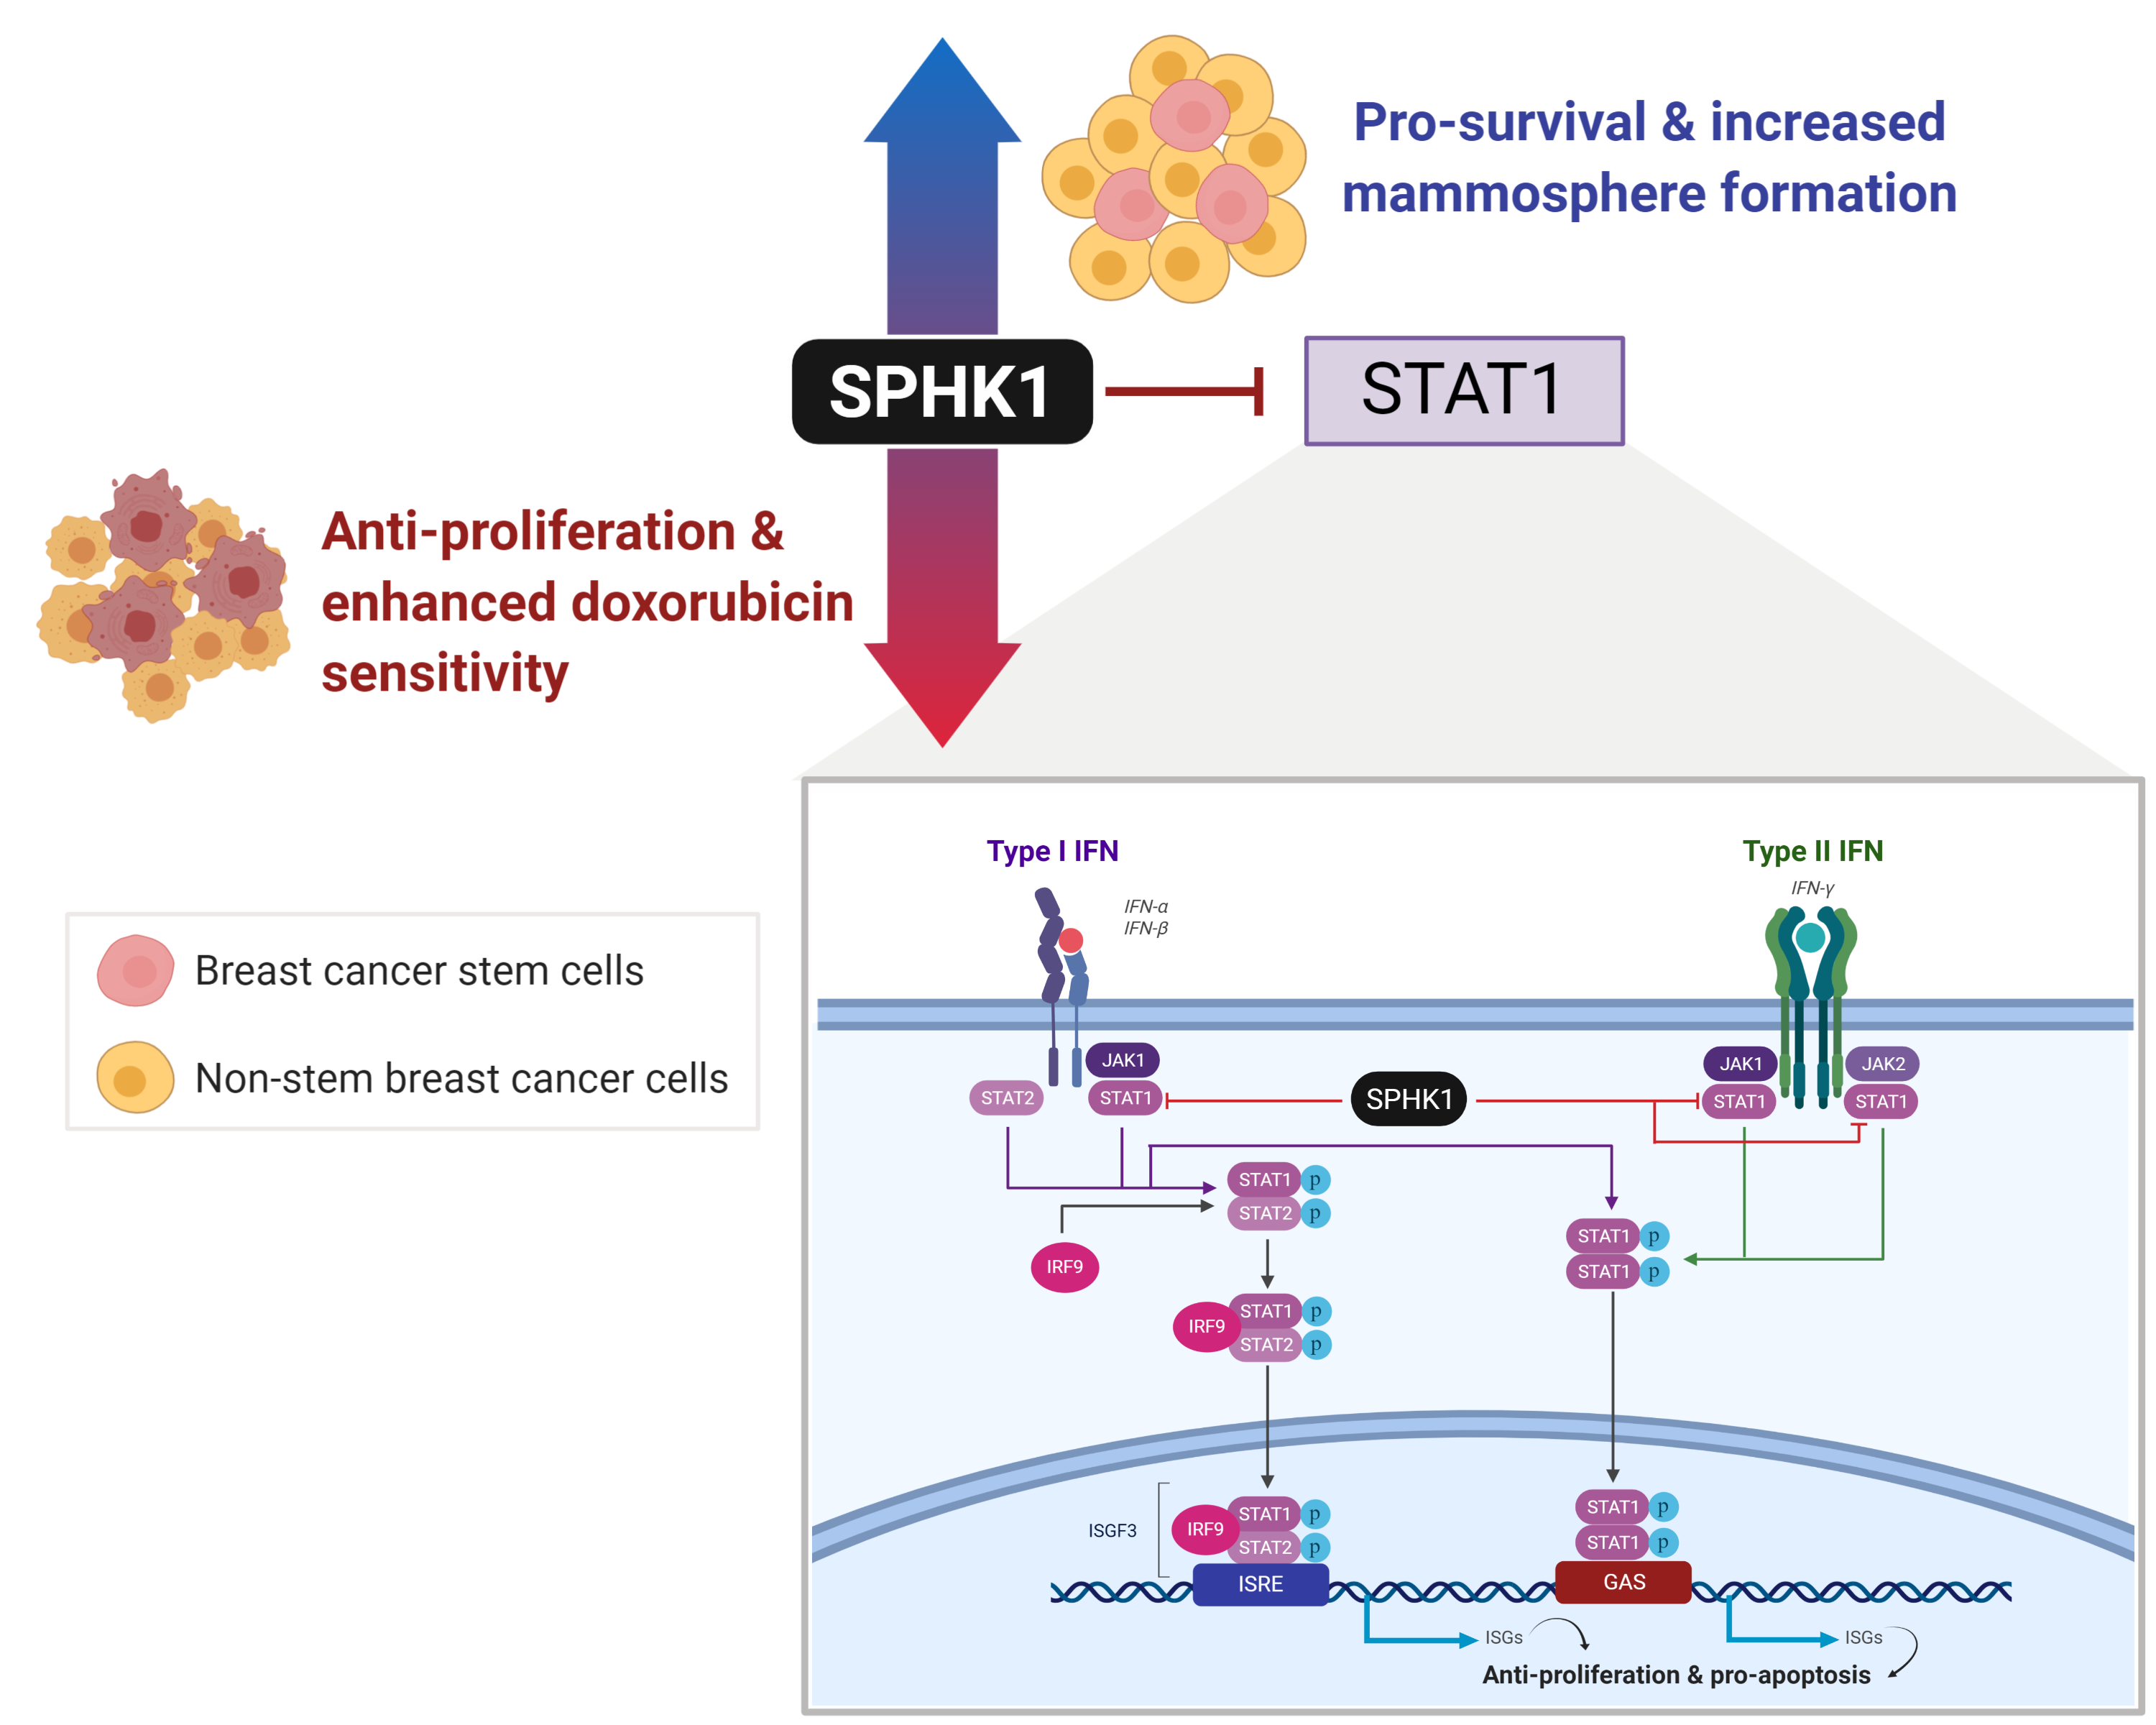 Sphingosine Kinase 1 Regulates the Survival of Breast Cancer Stem Cells and Non-stem Breast Cancer Cells by Suppression of STAT1